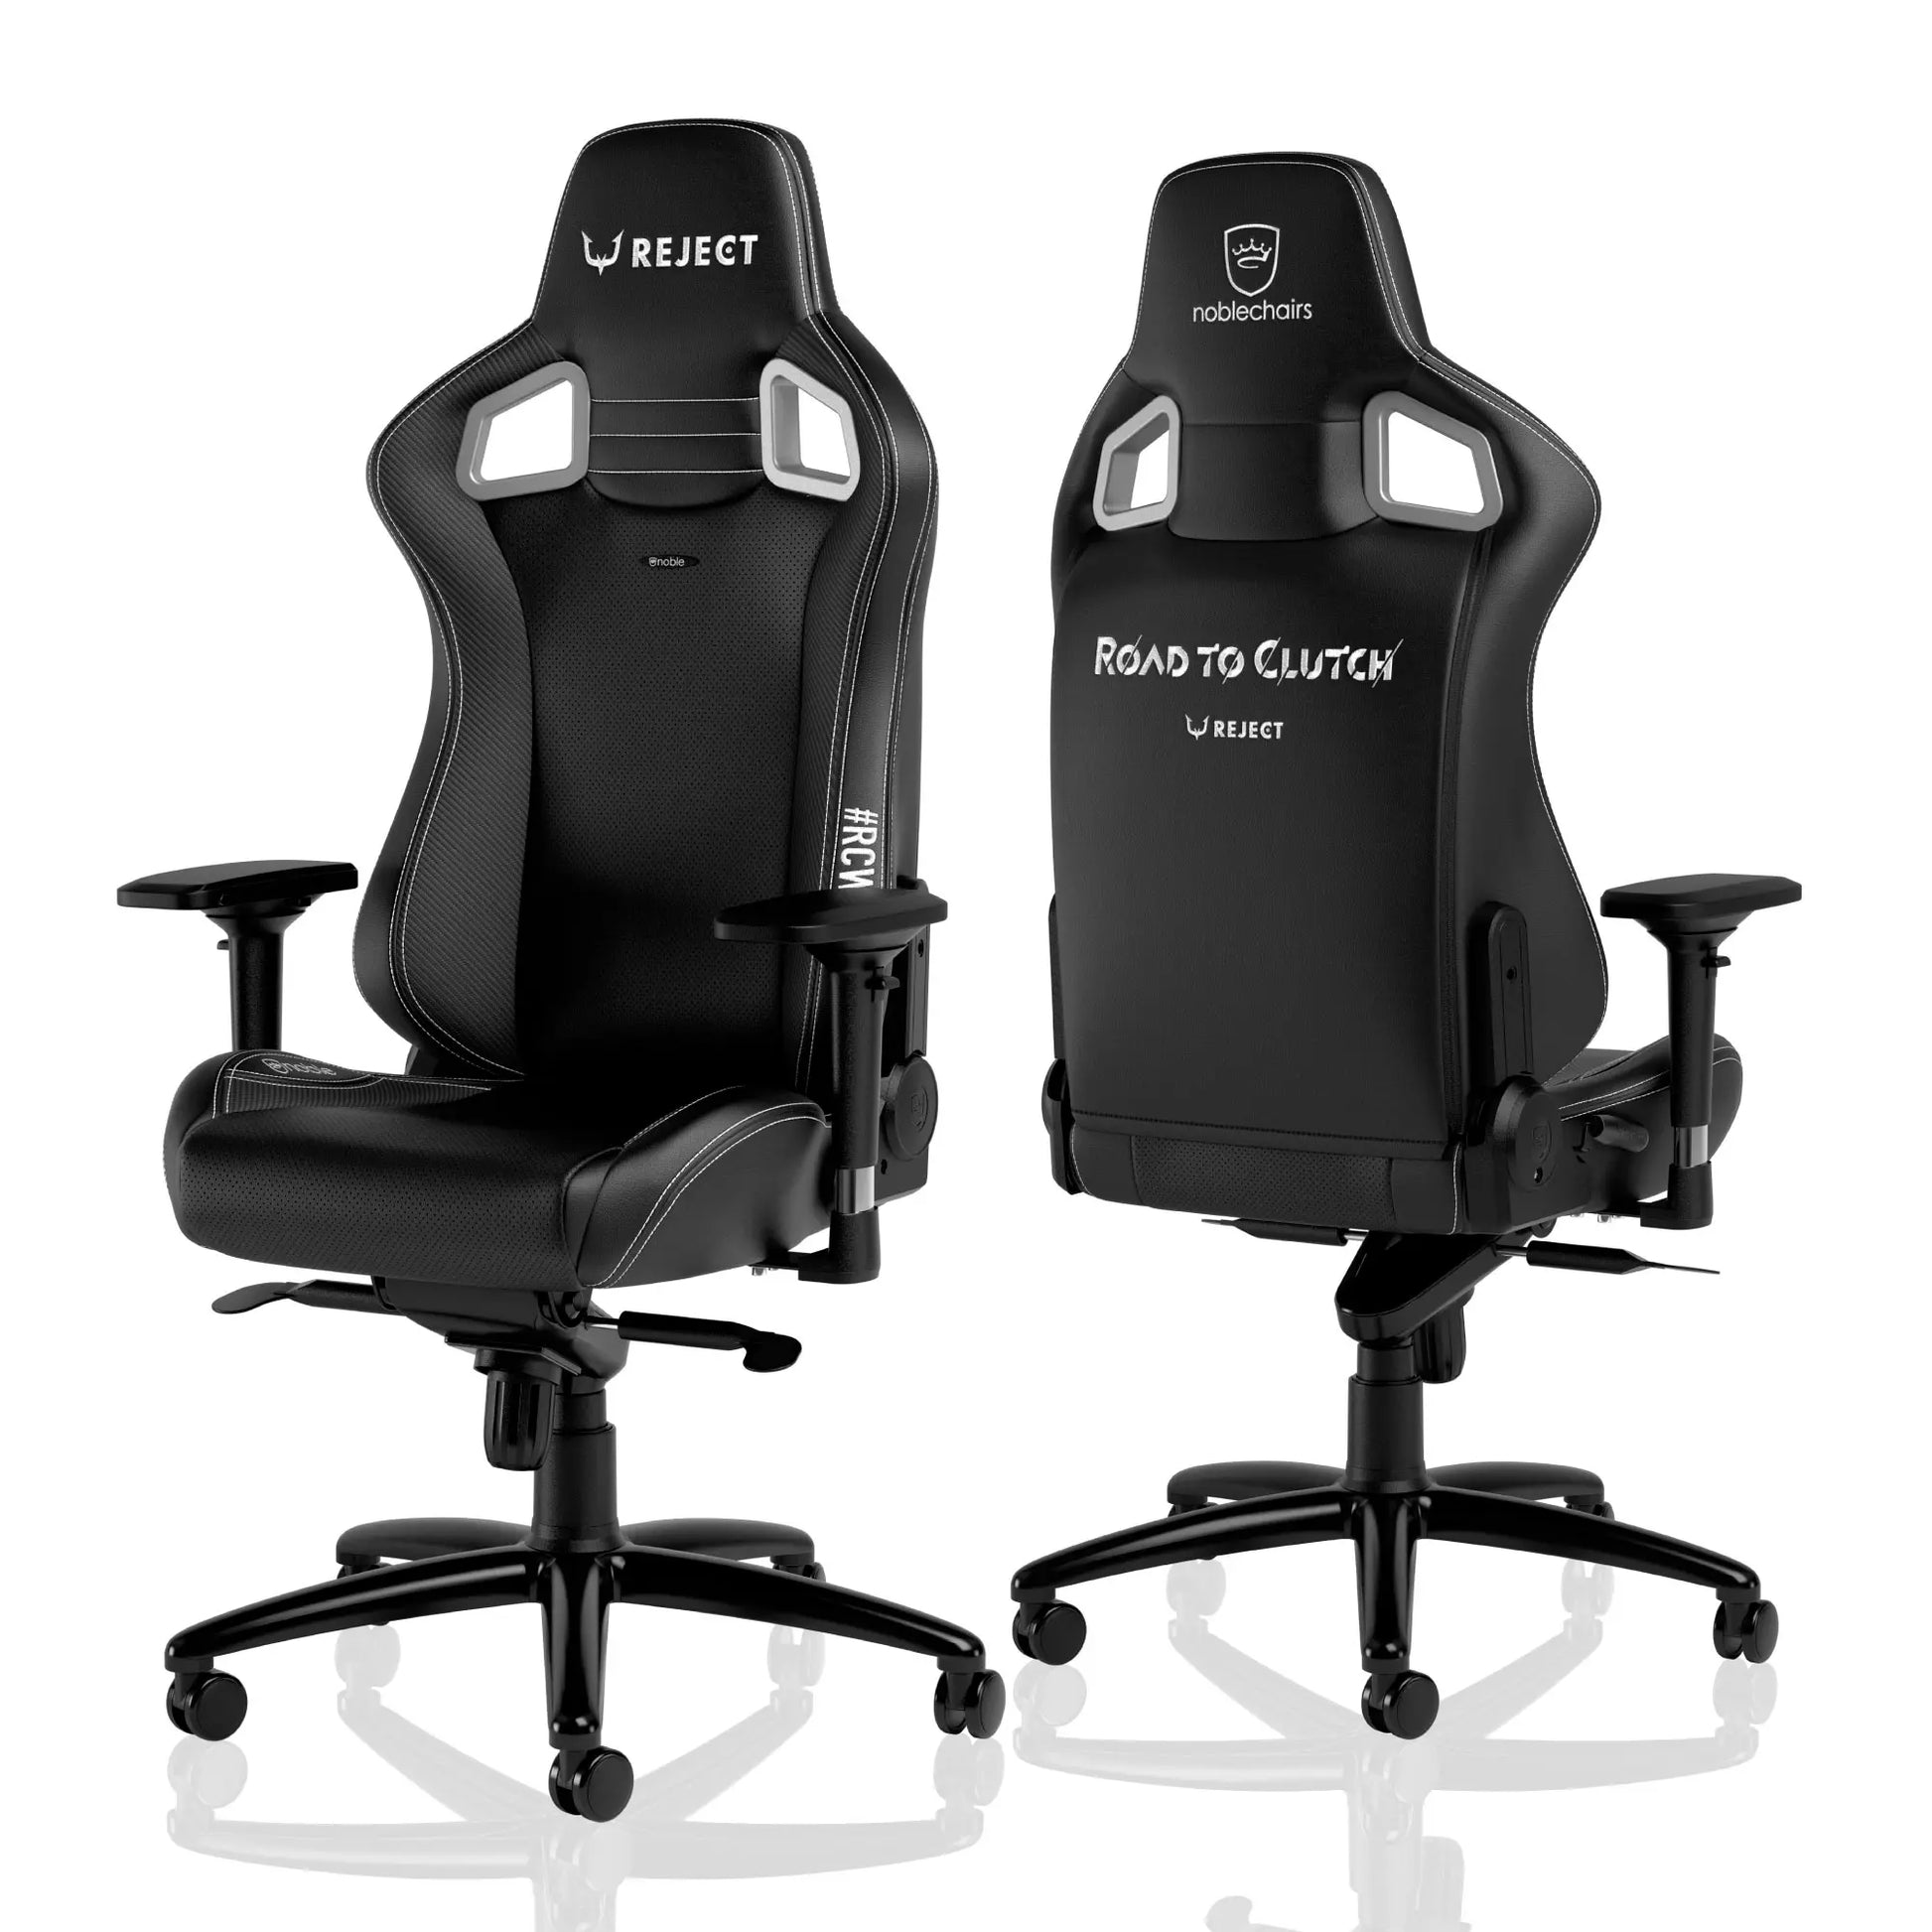 noblechairs ゲーミングチェア｜EPIC - REJECT Edition｜NBL-EPC-PU